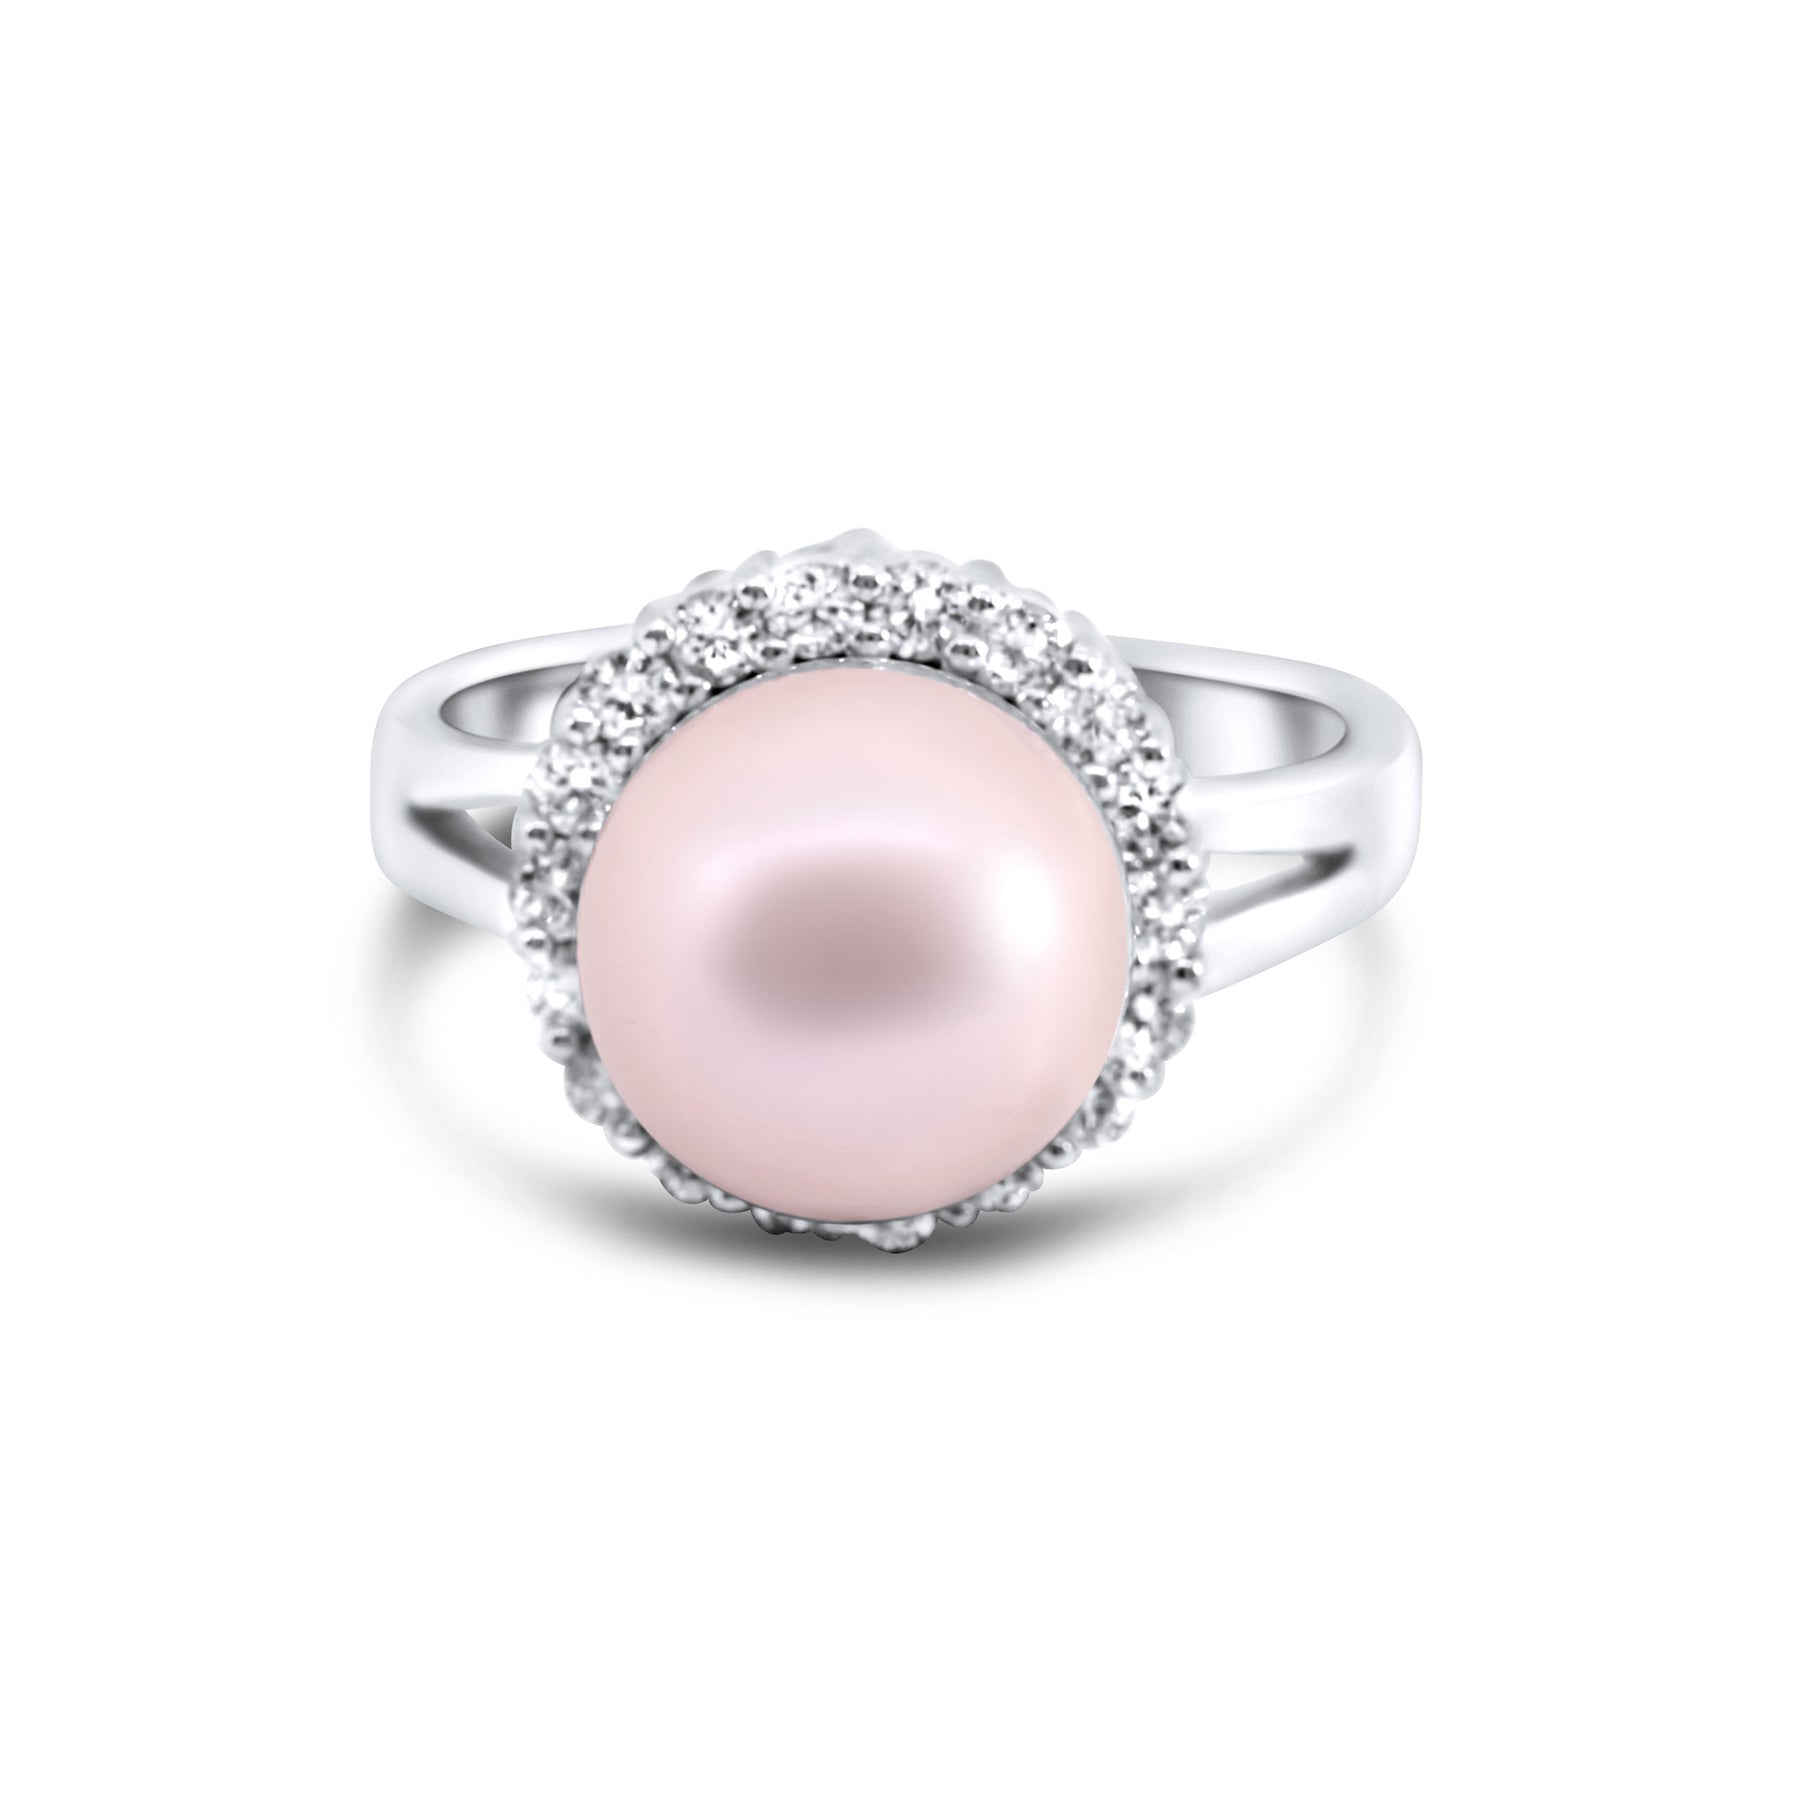 Light Pink Pearl Ring, Sterling Silver Ring, Rosaline Pearl Solitaire,  Right Hand Ring, Rose Gold Ring, Gifts for Women Handmade - Etsy | Pink  pearl ring, Sterling silver rings, Swarovski crystal rings